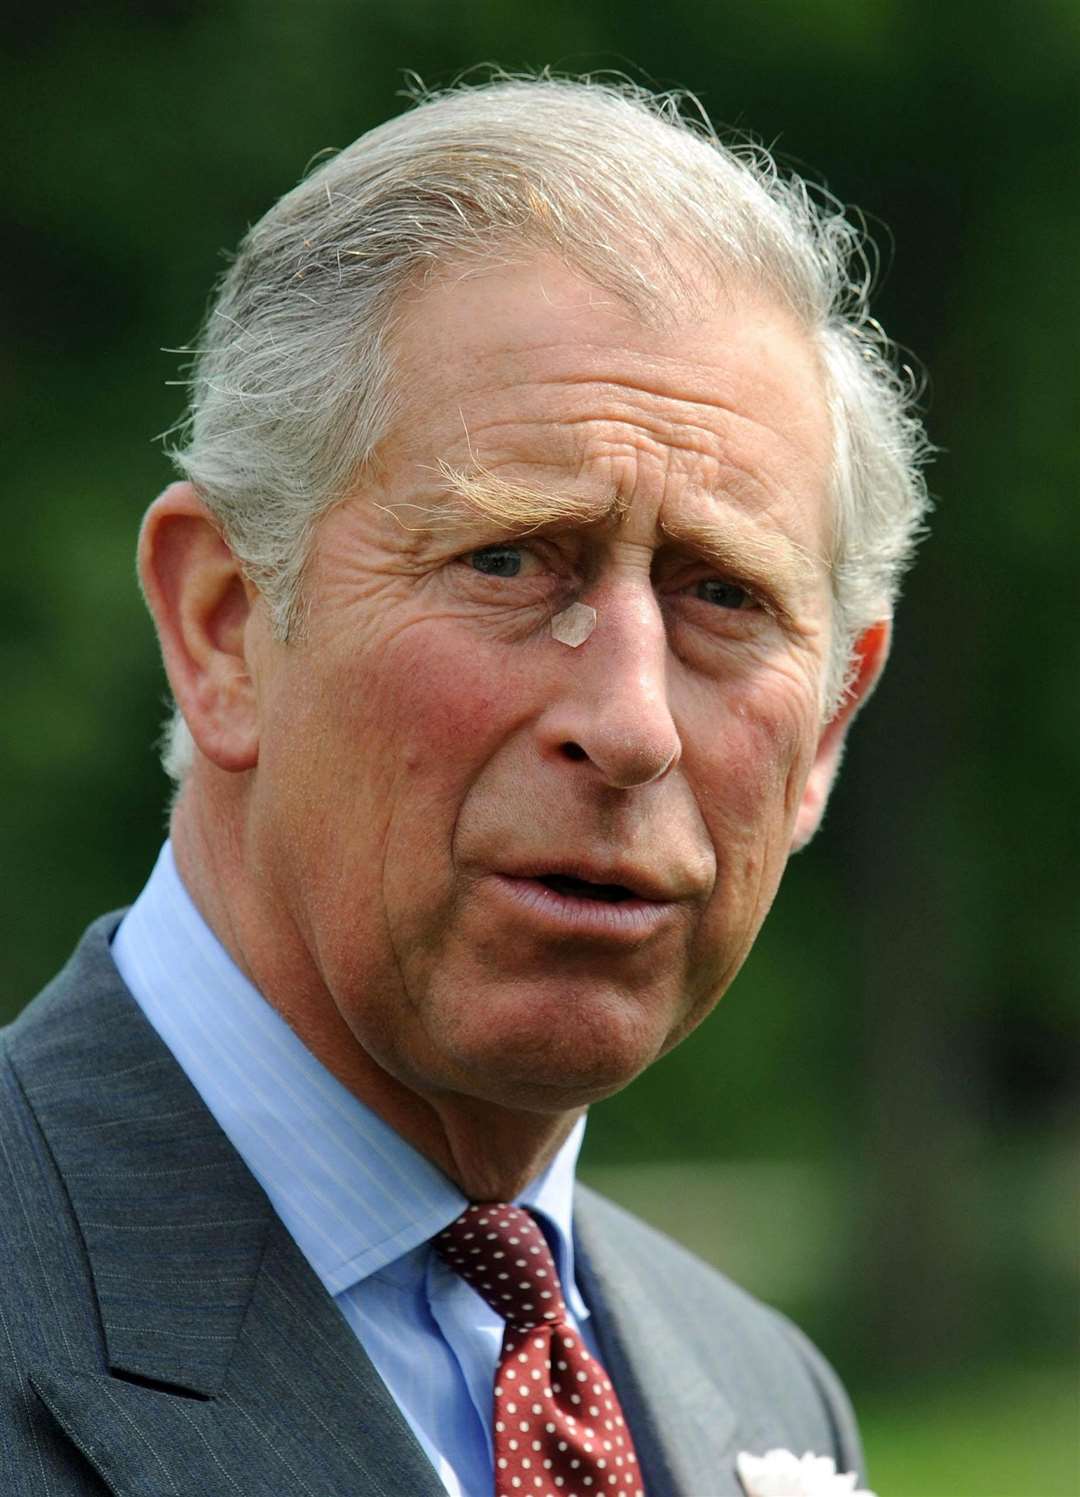 The Prince of Wales with a small plaster on the side of his nose after a minor procedure in 2008 (Barry Batchelor/PA)